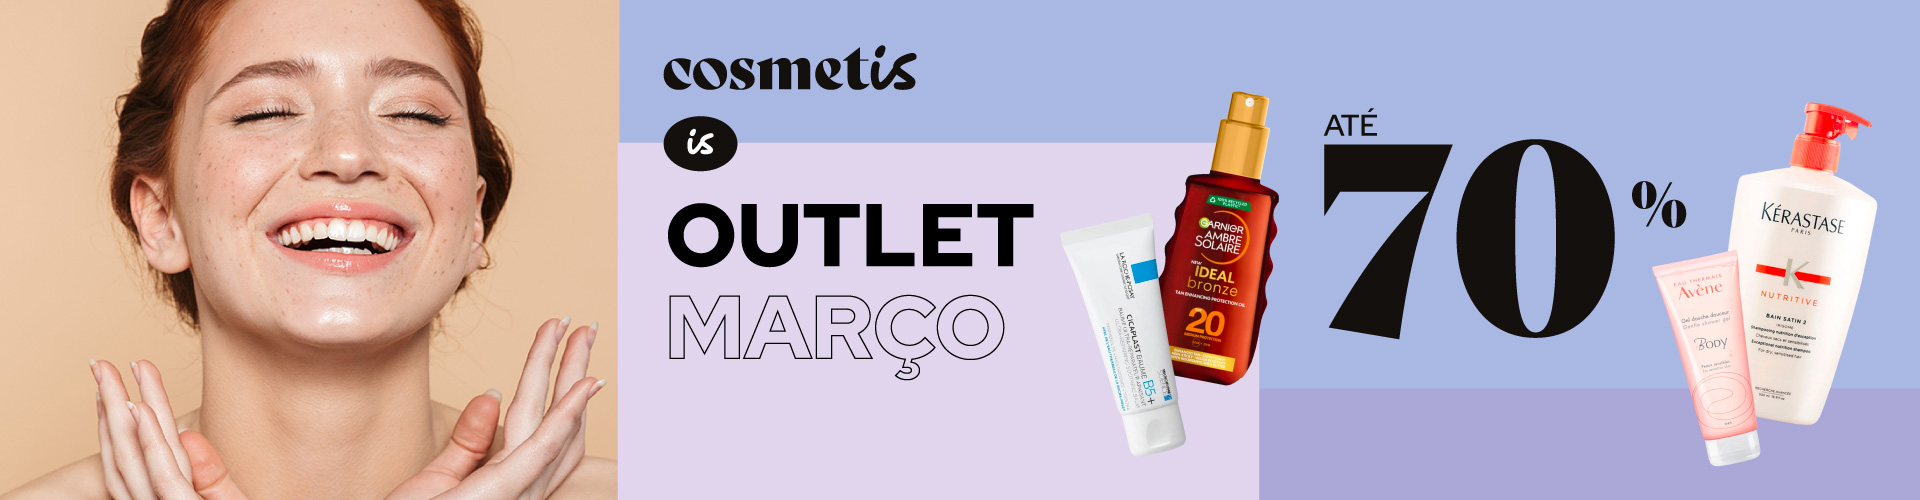 Cosmetis is Outlet